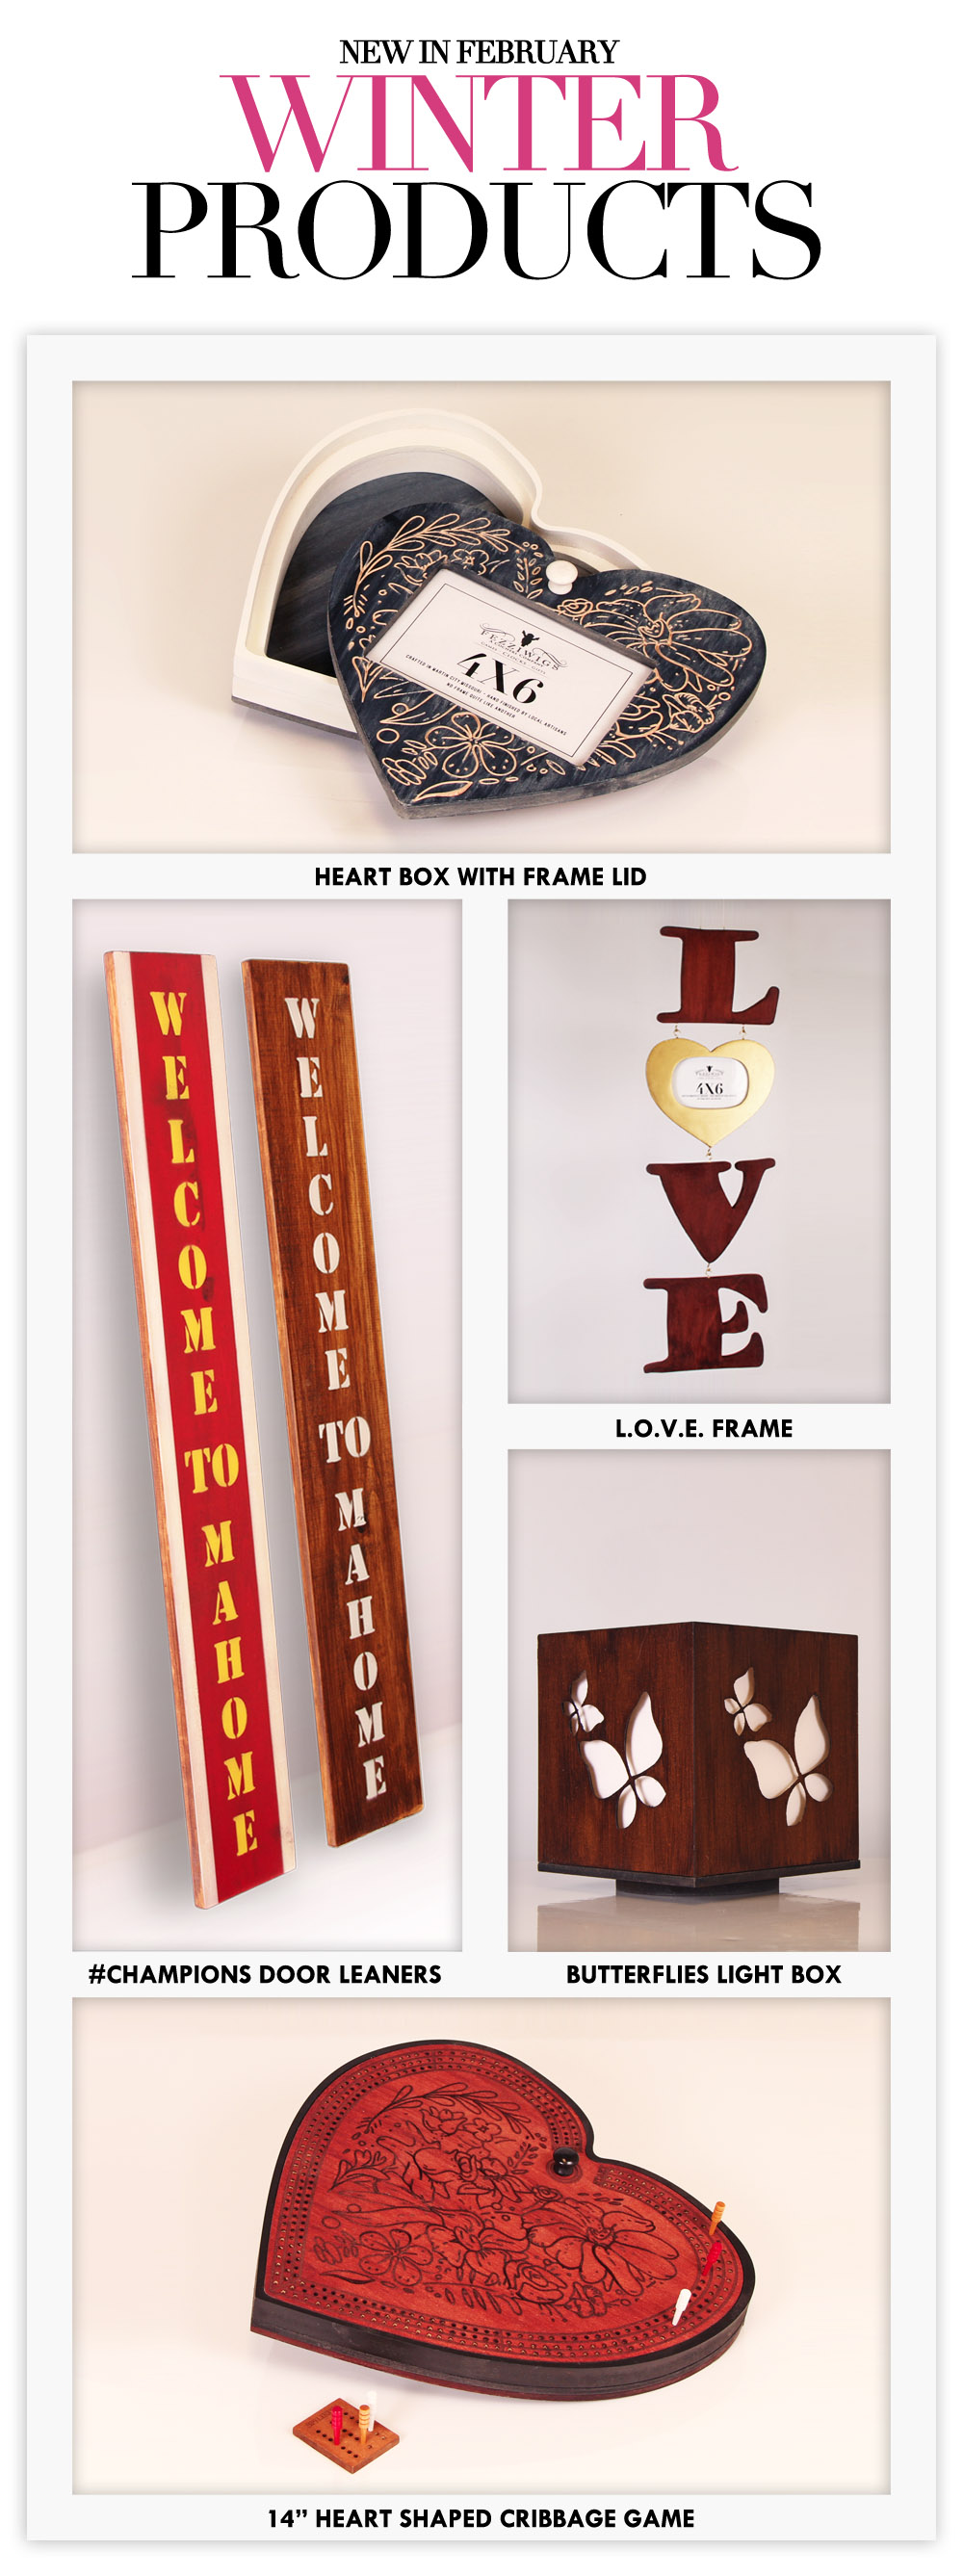 **NEW WINTER ITEMS: Heart Box with Frame Lid, Door Leaners, LOVE Frame, Butterflies Light Box, Heart Cribbage.